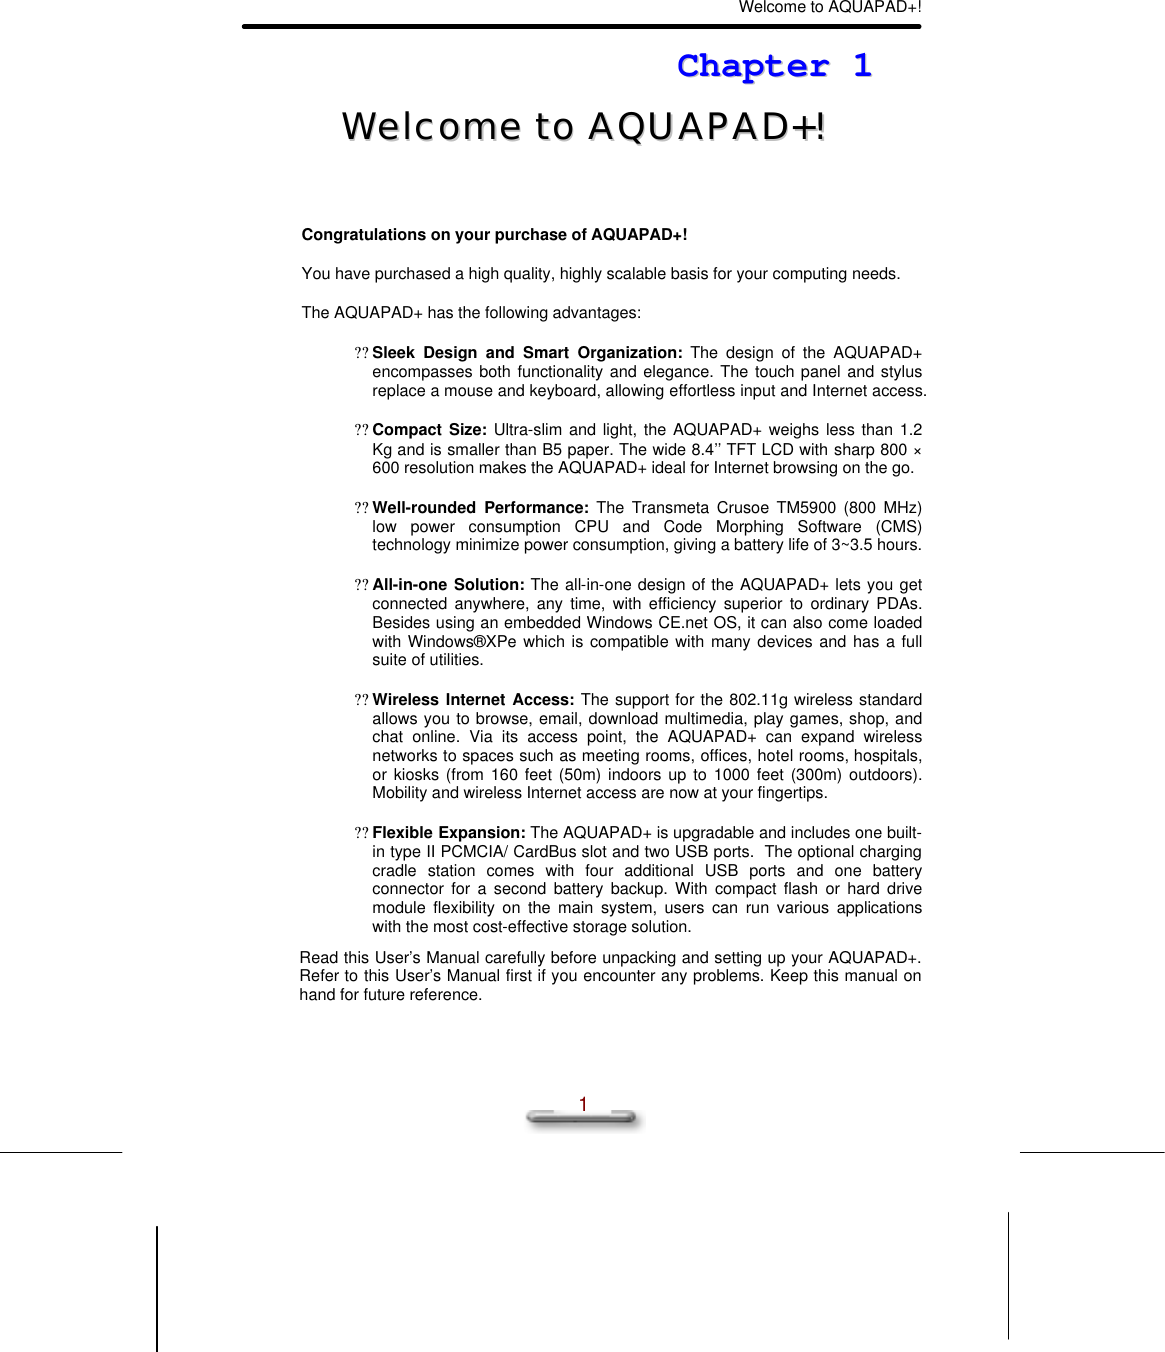 Welcome to AQUAPAD+!  1 CChhaapptteerr  11  WWeellccoommee  ttoo  AAQQUUAAPPAADD++!!   Congratulations on your purchase of AQUAPAD+! You have purchased a high quality, highly scalable basis for your computing needs. The AQUAPAD+ has the following advantages: ?? Sleek Design and Smart Organization: The design of the AQUAPAD+ encompasses both functionality and elegance. The touch panel and stylus replace a mouse and keyboard, allowing effortless input and Internet access. ?? Compact Size: Ultra-slim and light, the AQUAPAD+ weighs less than 1.2 Kg and is smaller than B5 paper. The wide 8.4’’ TFT LCD with sharp 800 × 600 resolution makes the AQUAPAD+ ideal for Internet browsing on the go. ?? Well-rounded Performance: The Transmeta Crusoe TM5900 (800 MHz) low power consumption CPU and Code Morphing Software (CMS) technology minimize power consumption, giving a battery life of 3~3.5 hours. ?? All-in-one Solution: The all-in-one design of the AQUAPAD+ lets you get connected anywhere, any time, with efficiency superior to ordinary PDAs. Besides using an embedded Windows CE.net OS, it can also come loaded with Windows®XPe which is compatible with many devices and has a full suite of utilities. ?? Wireless Internet Access: The support for the 802.11g wireless standard allows you to browse, email, download multimedia, play games, shop, and chat online. Via its access point, the AQUAPAD+ can expand wireless networks to spaces such as meeting rooms, offices, hotel rooms, hospitals, or kiosks (from 160 feet (50m) indoors up to 1000 feet (300m) outdoors).  Mobility and wireless Internet access are now at your fingertips. ?? Flexible Expansion: The AQUAPAD+ is upgradable and includes one built-in type II PCMCIA/ CardBus slot and two USB ports.  The optional charging cradle station comes with four additional USB ports and one battery connector for a second battery backup. With compact flash or hard drive module flexibility on the main system, users can run various applications with the most cost-effective storage solution. Read this User’s Manual carefully before unpacking and setting up your AQUAPAD+. Refer to this User’s Manual first if you encounter any problems. Keep this manual on hand for future reference. 